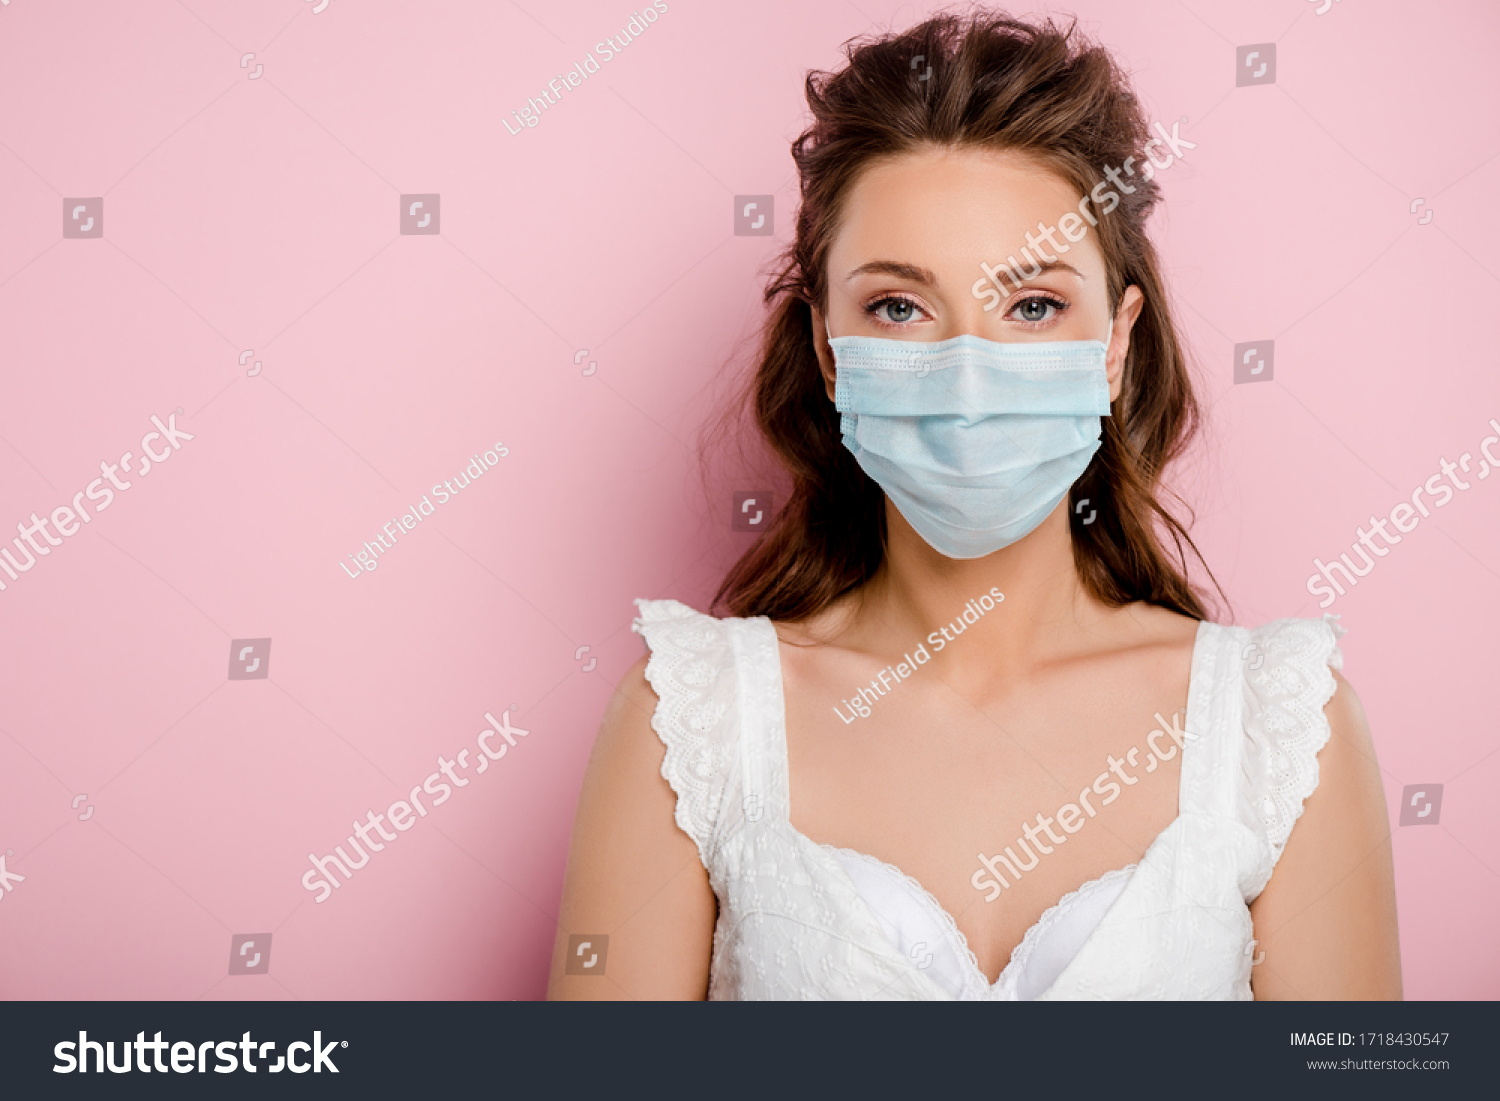 young woman in medical mask standing on pink #1718430547